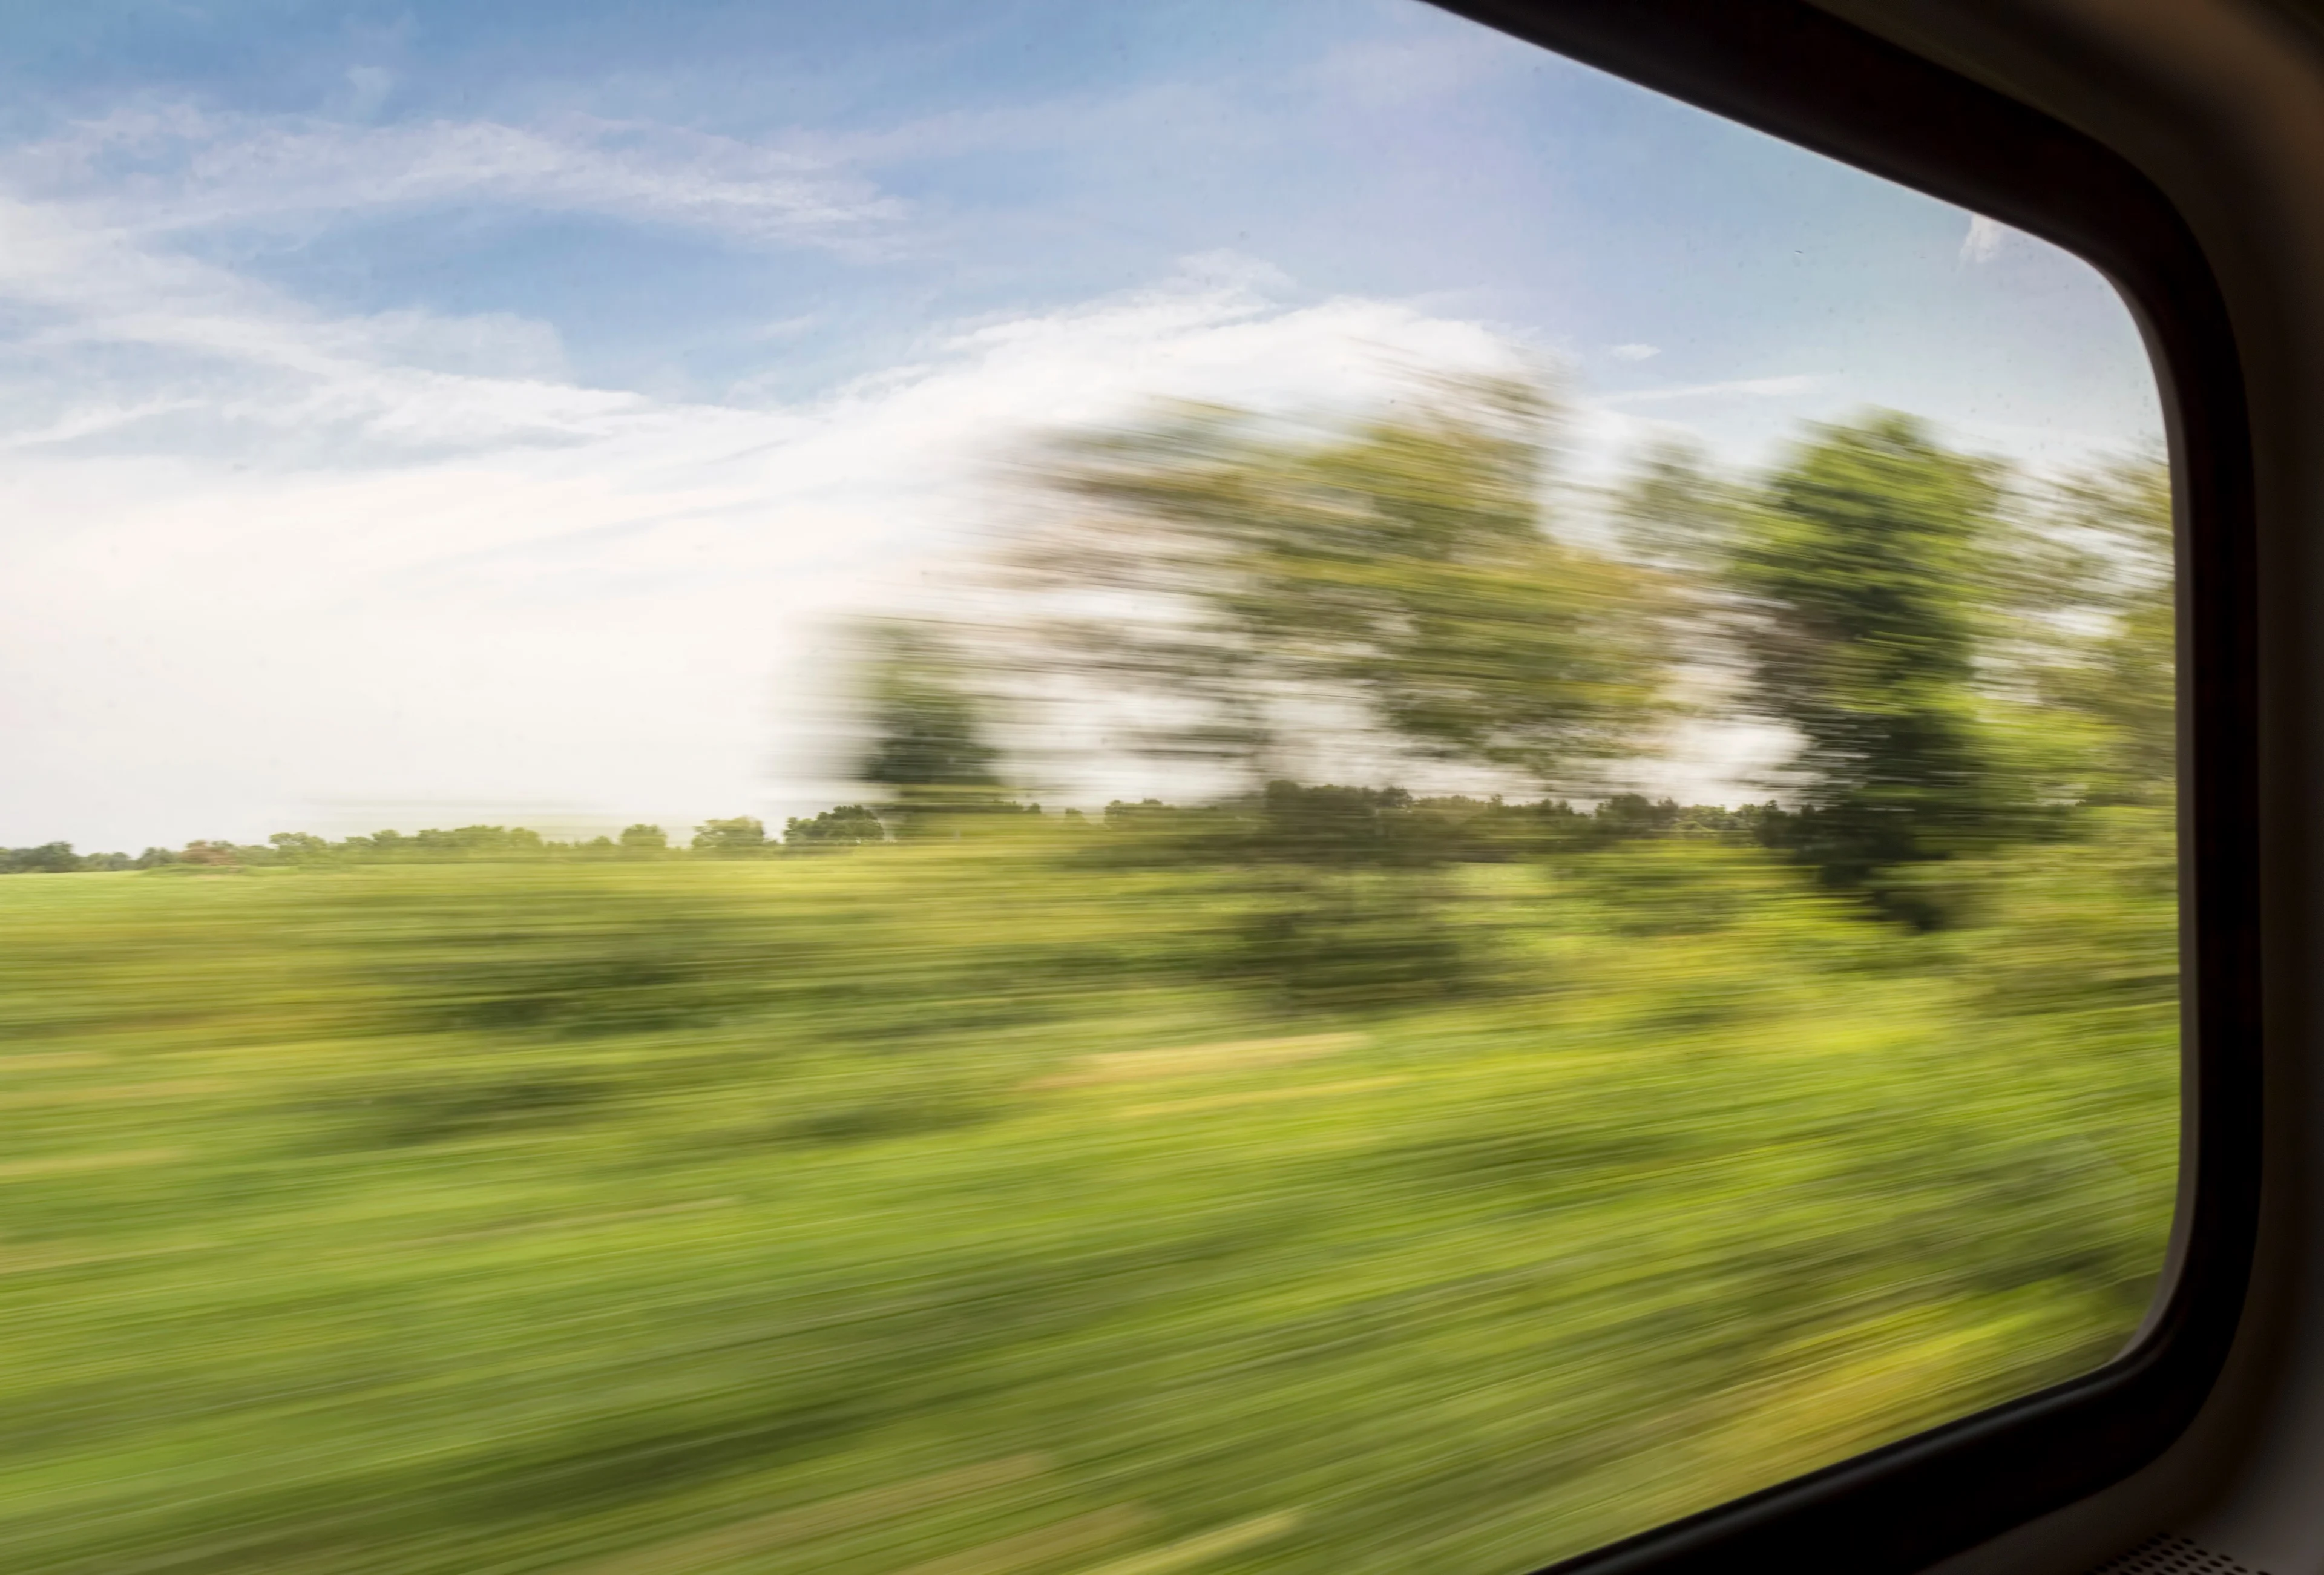 Blurred view of green fields and trees from the window of a fast-moving train